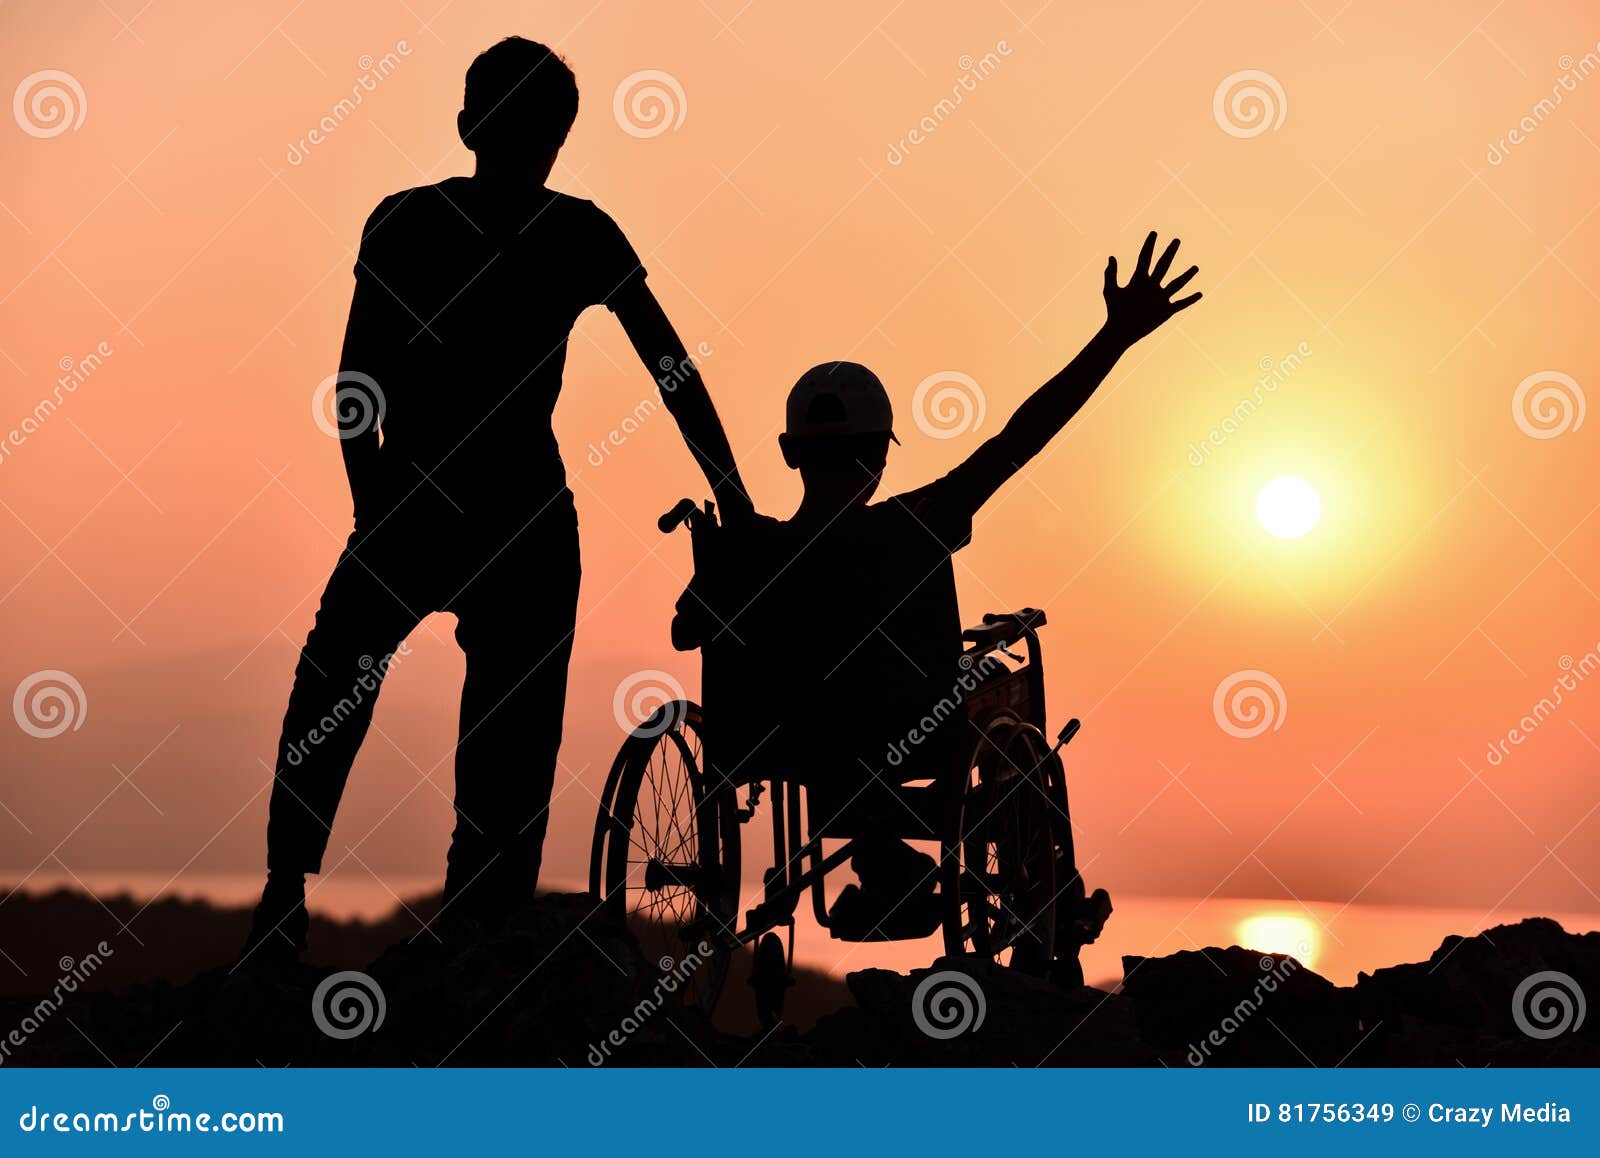 disabilities, watching the sun rise